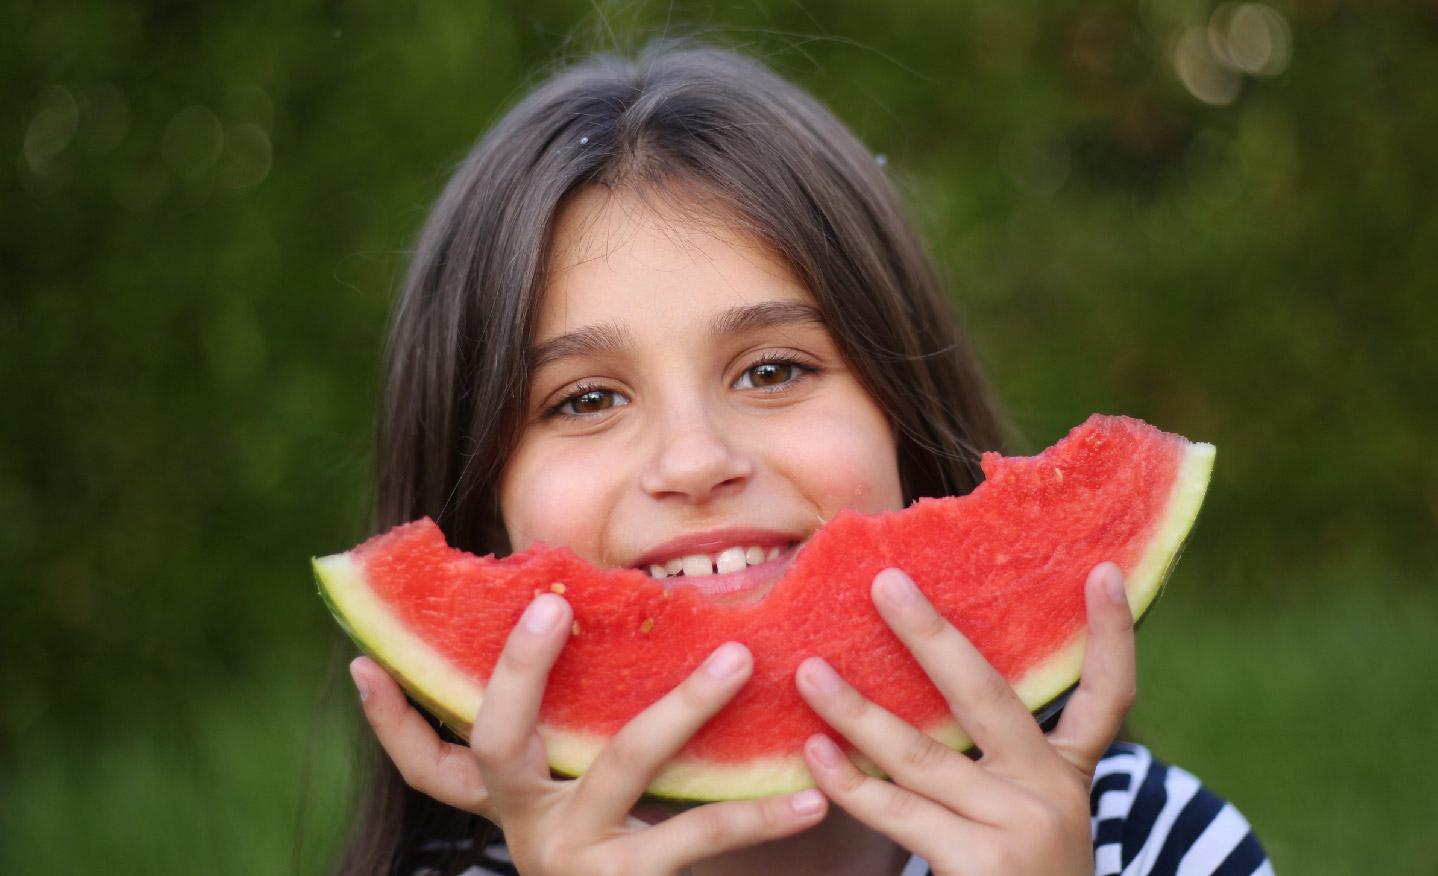 Worried that the summer heat will drain your child? Here are some summer foods that will keep him cool and healthy